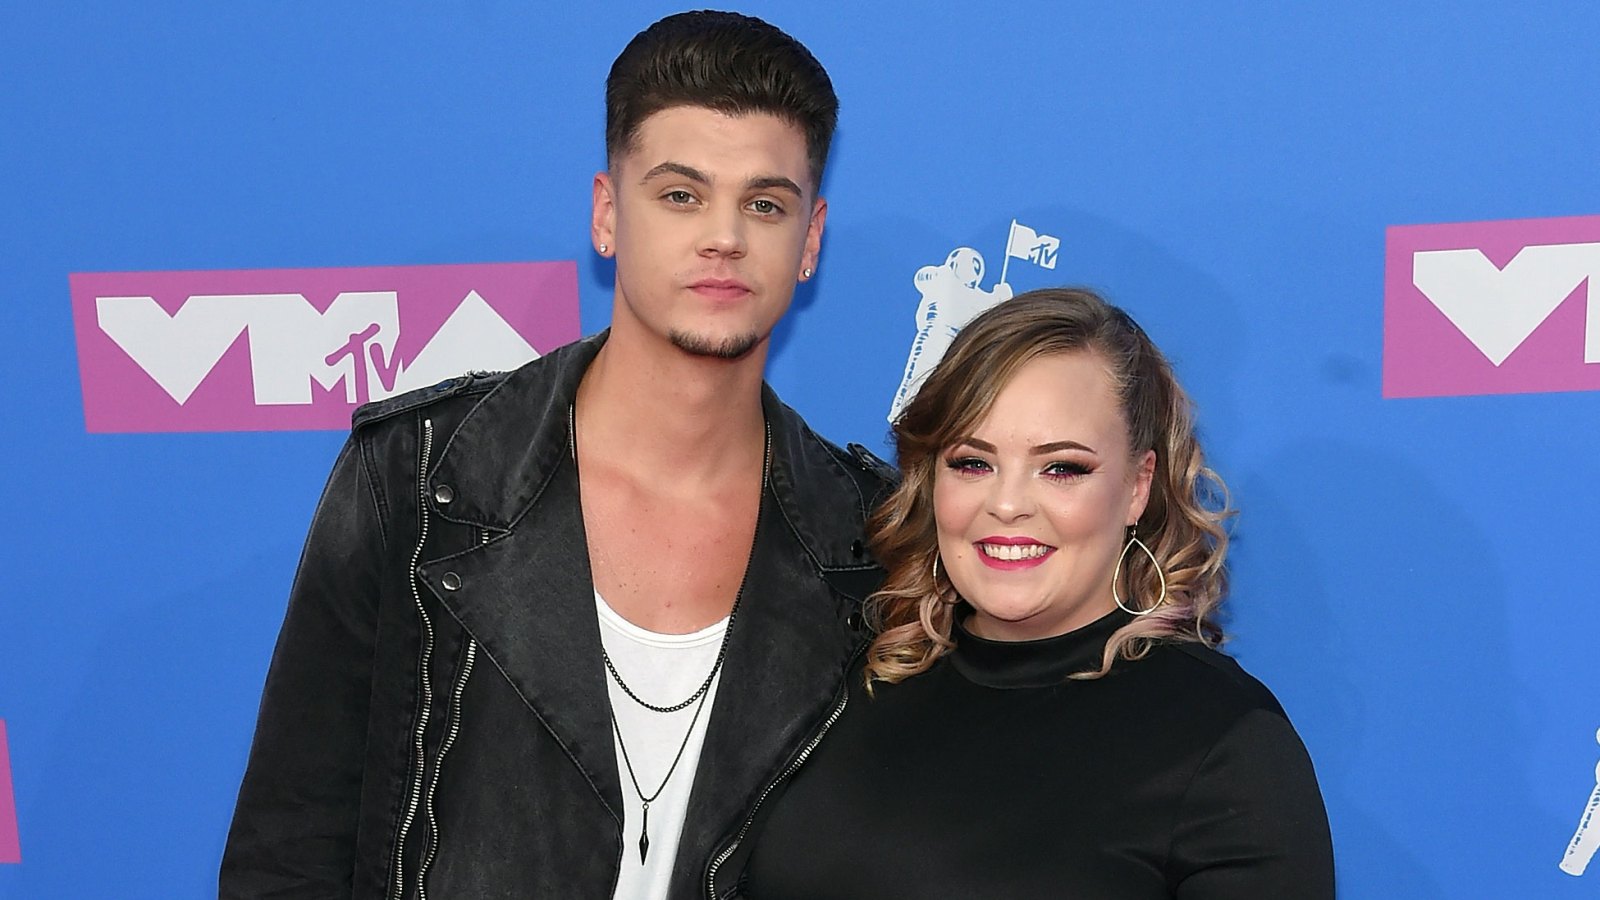 Tyler Baltierra Reflects on Putting 10-Year-Old Daughter With Catelynn Lowell Up For Adoption 'We Just Cried' 2018 MTV Video Music Awards